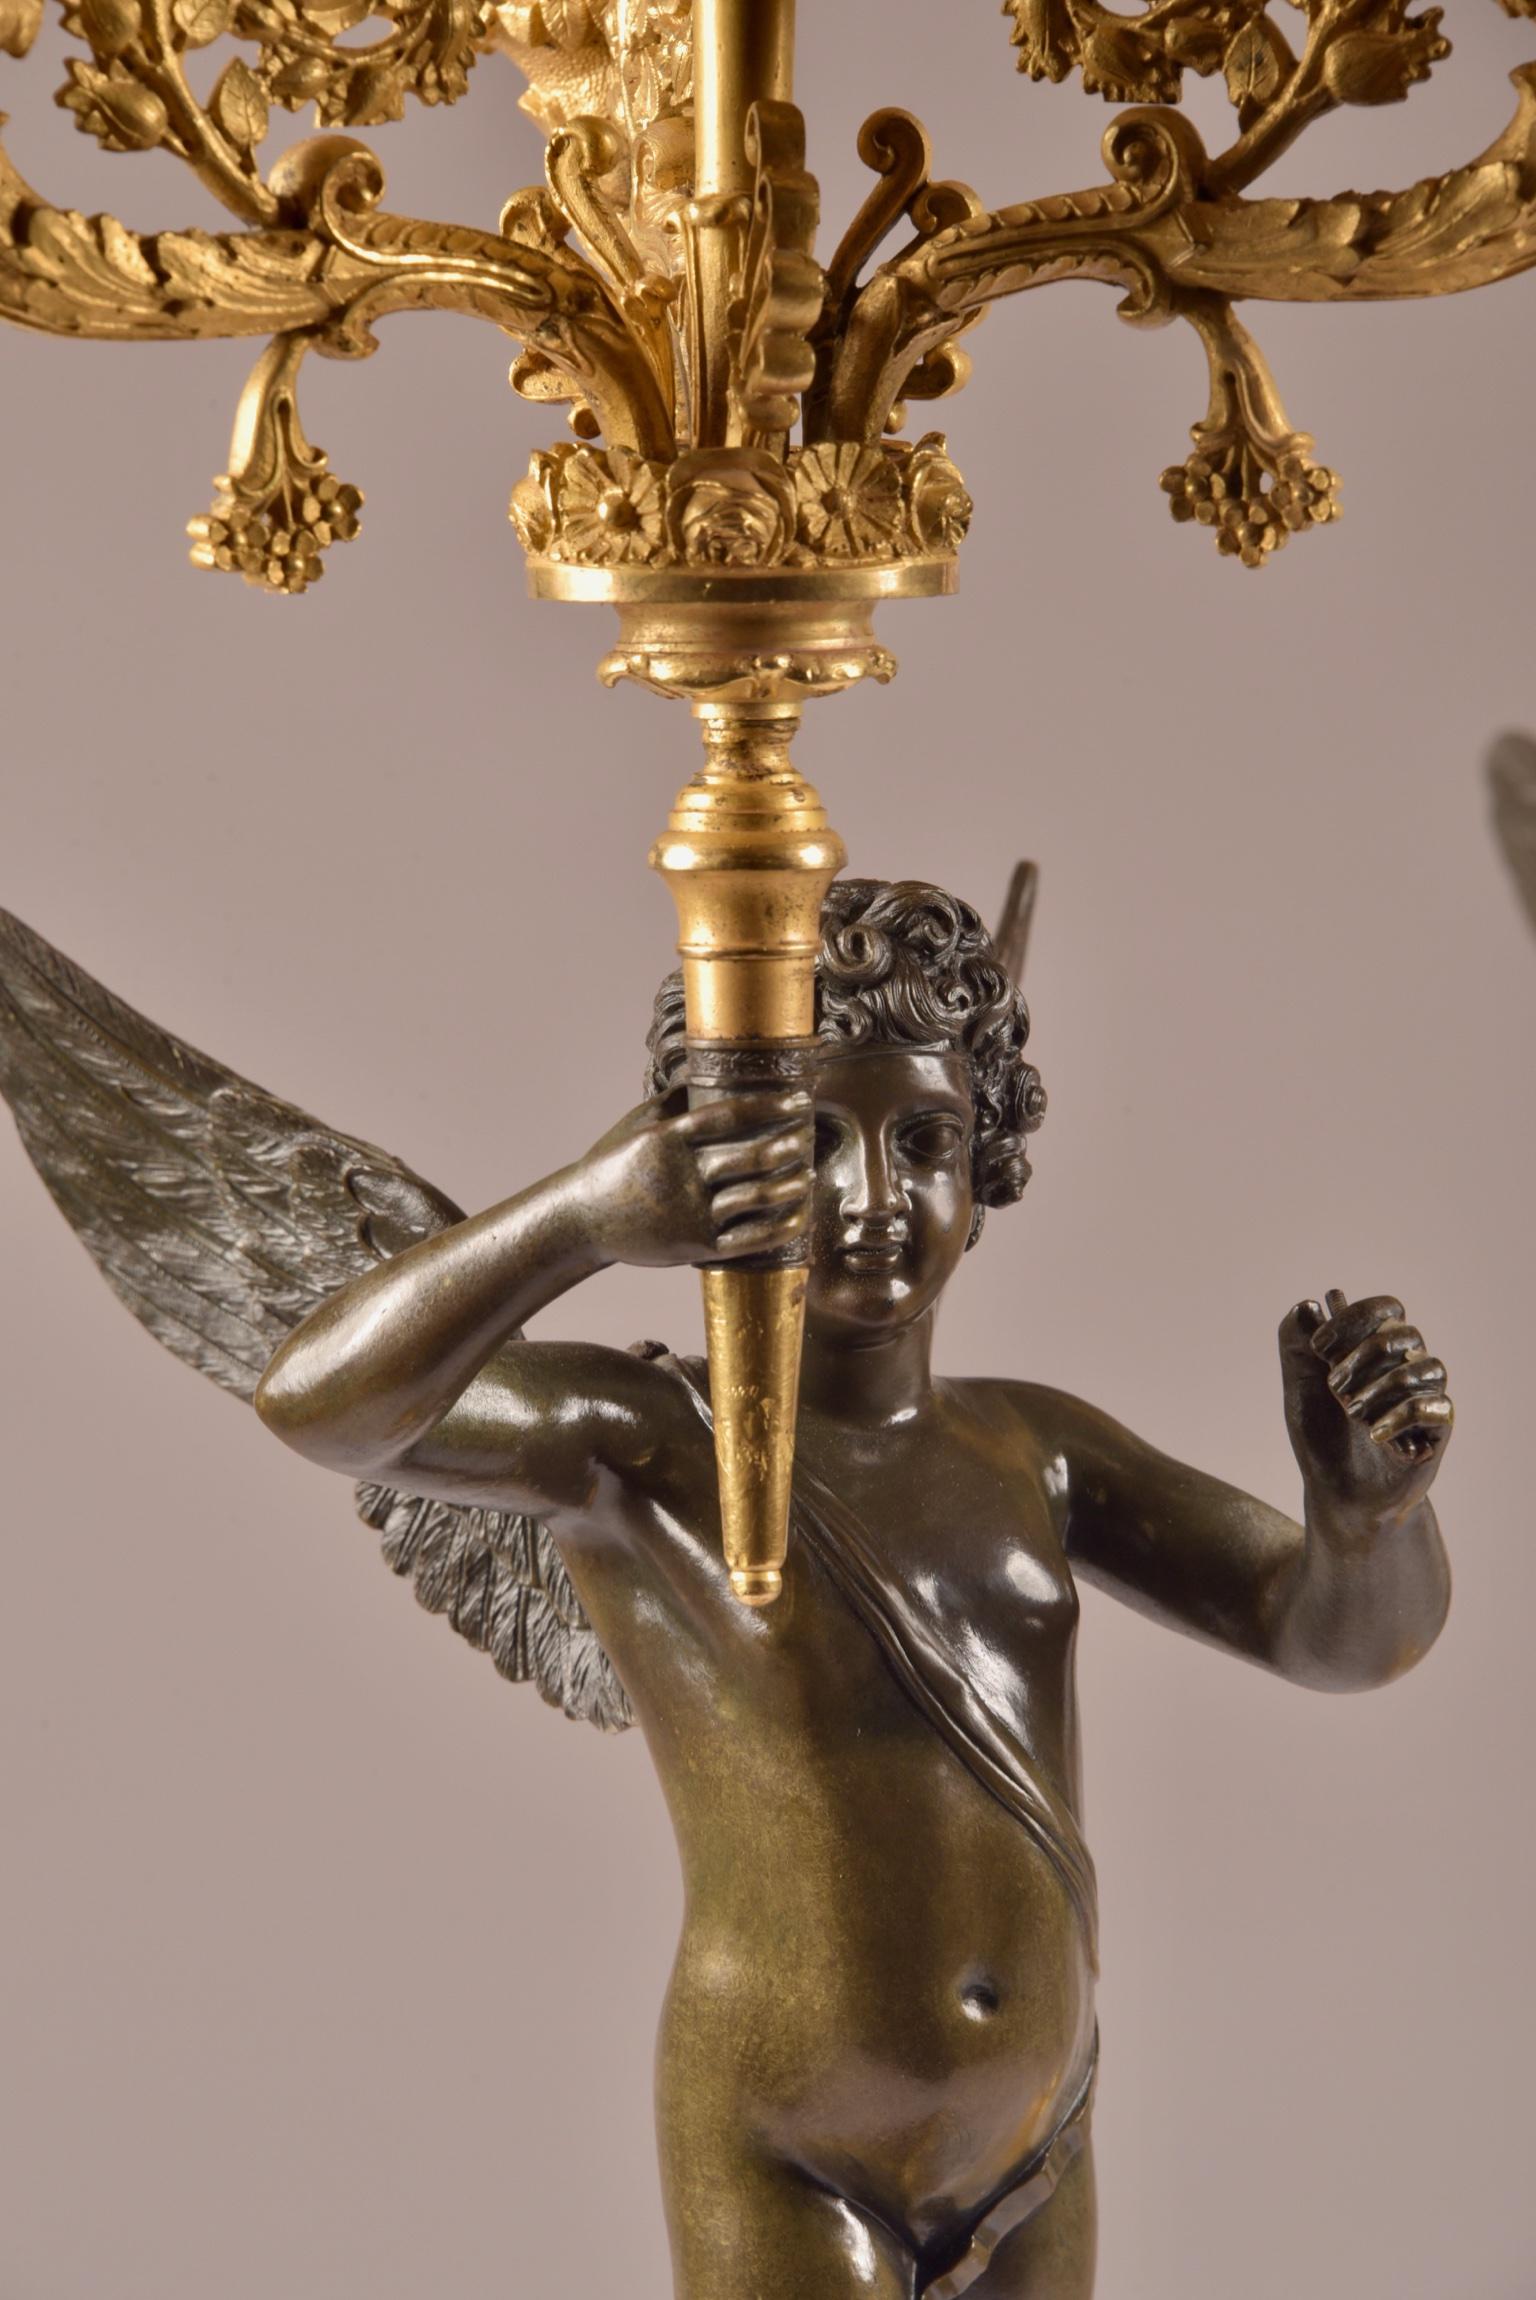 Pair of French Empire Candelabras with Putti, Superb Ormolu Candleholders, 1810  im Angebot 8